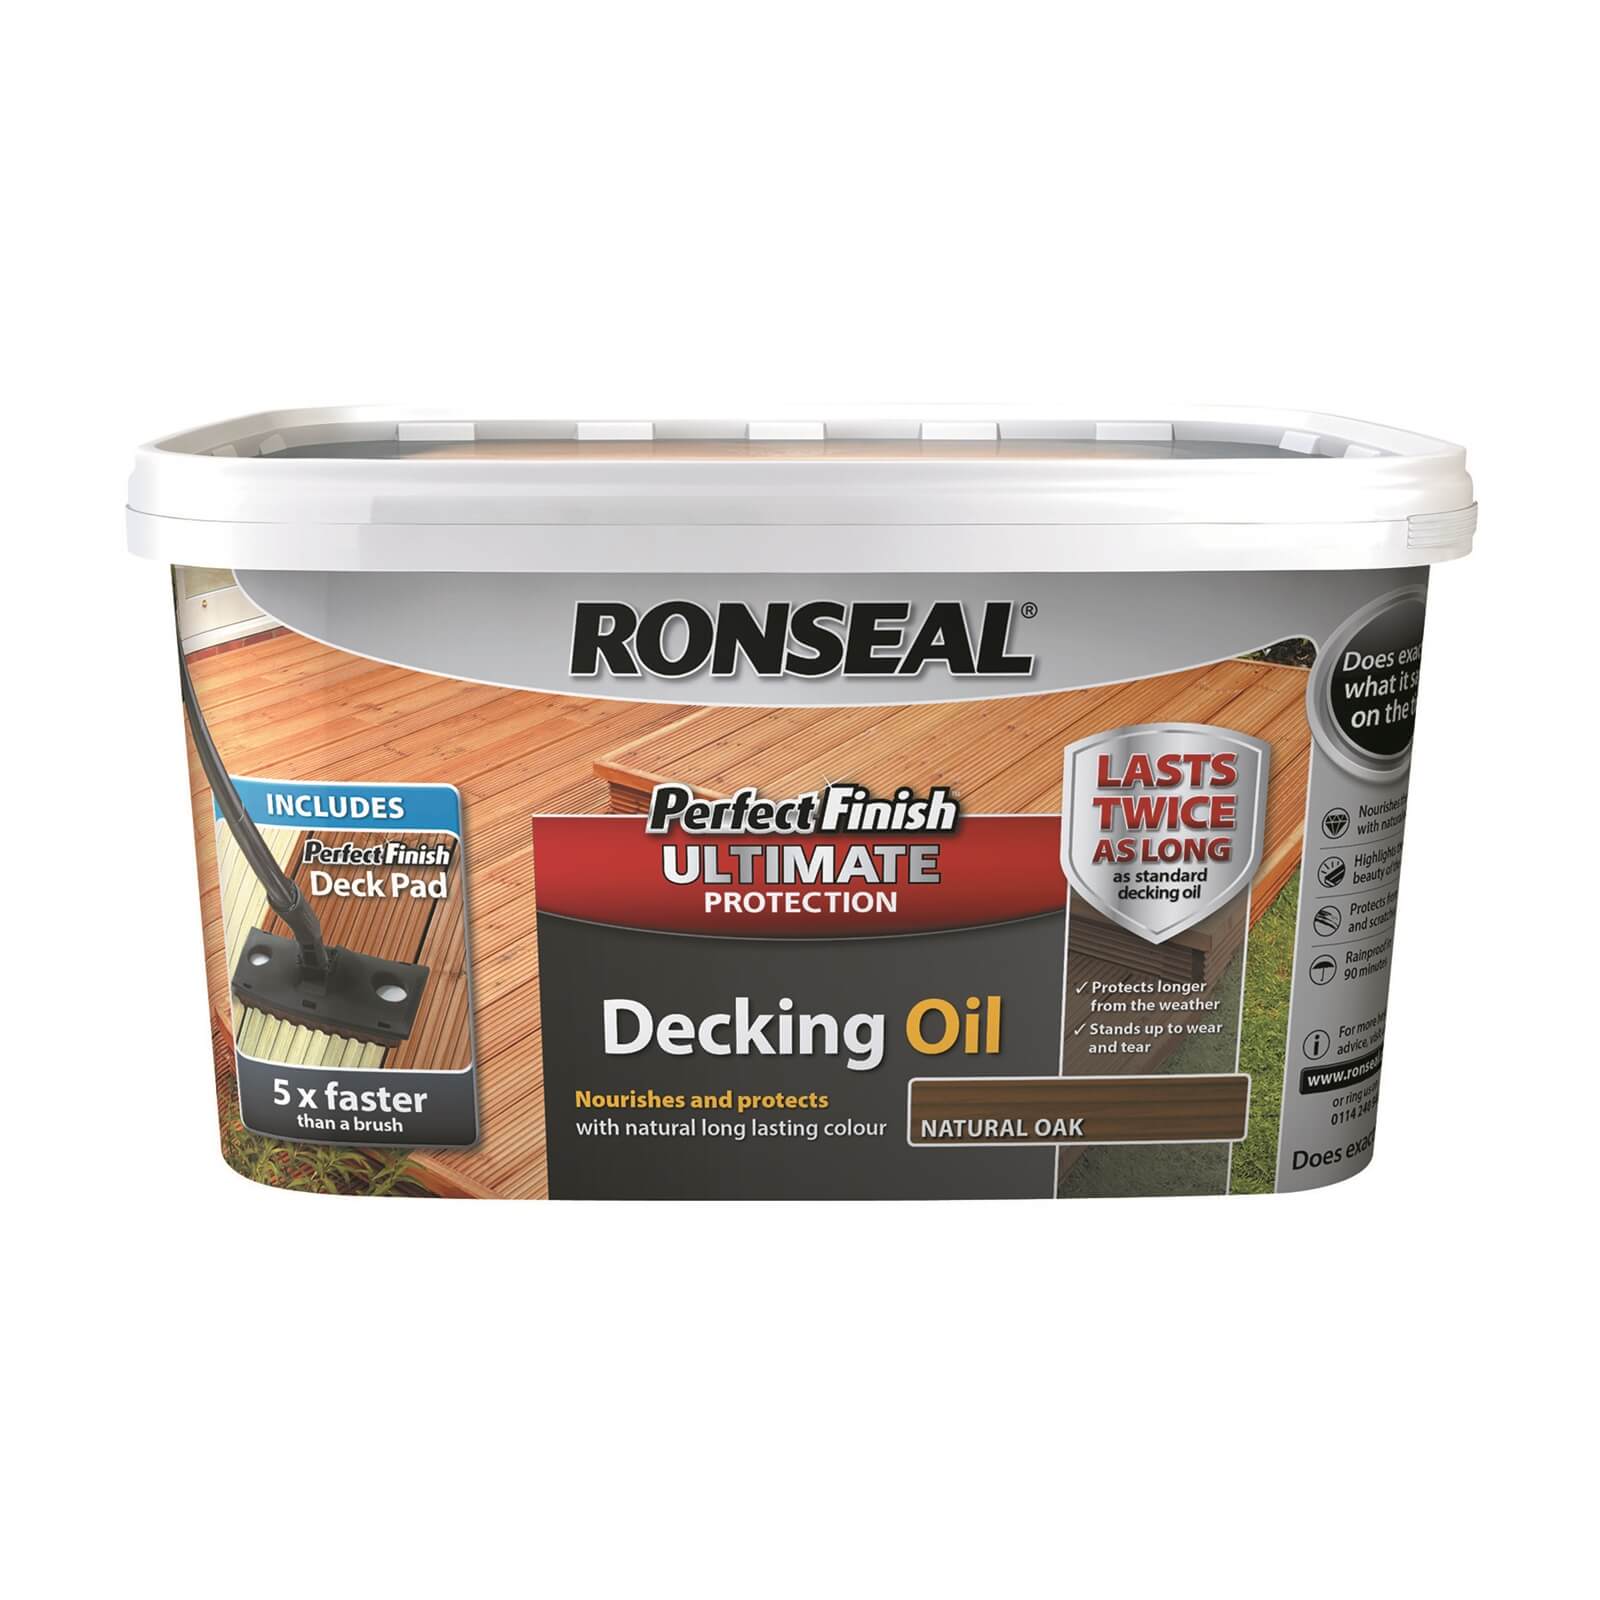 Ronseal Perfect Finish Ultimate Decking Oil - Natural Oak